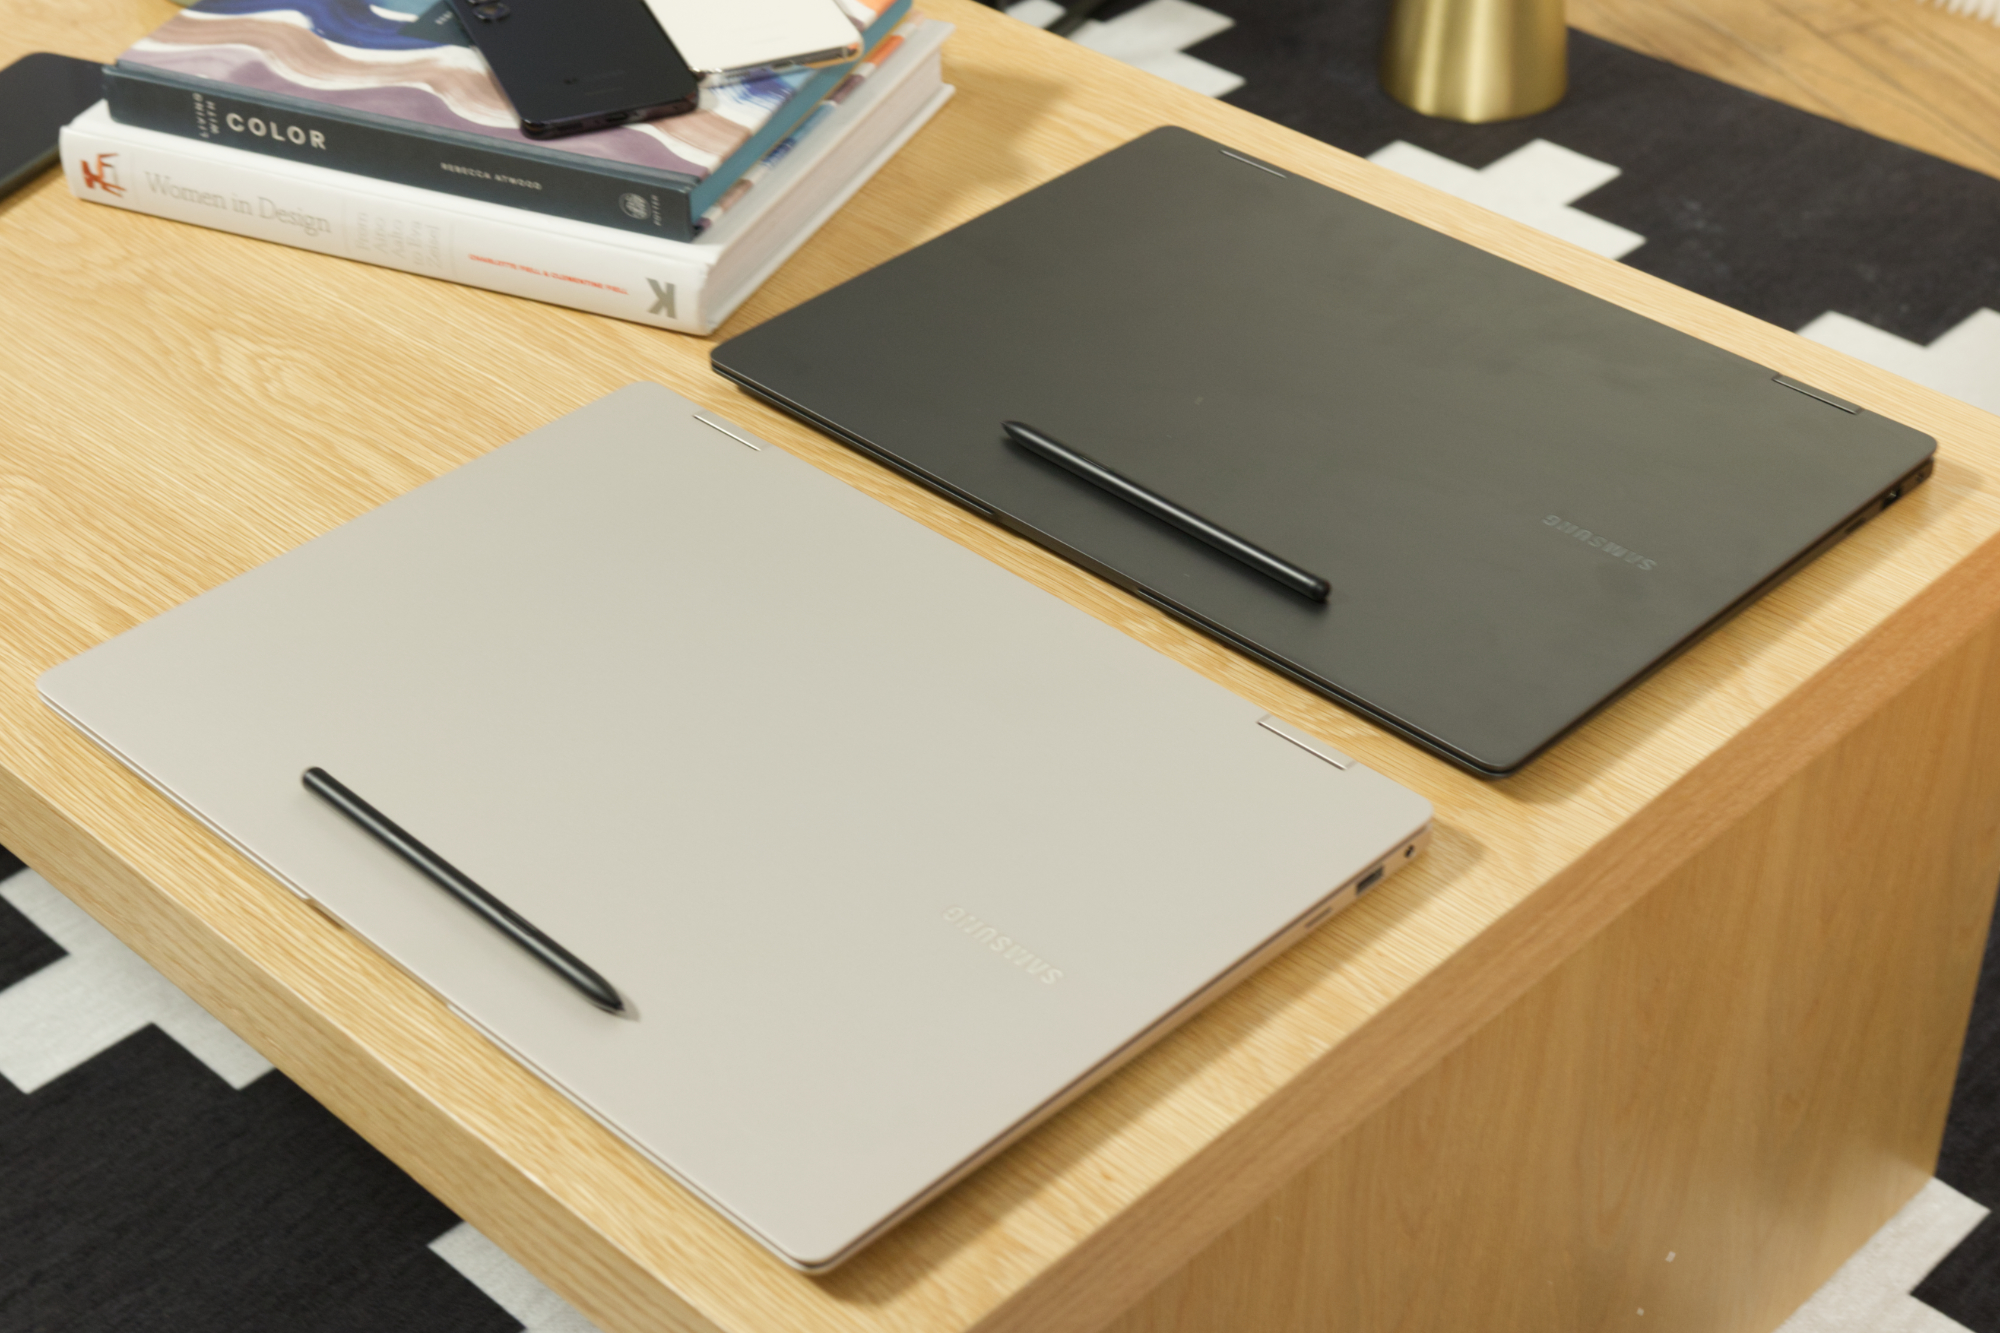 Samsung Galaxy Book 3 Pro 360 in silver and black.